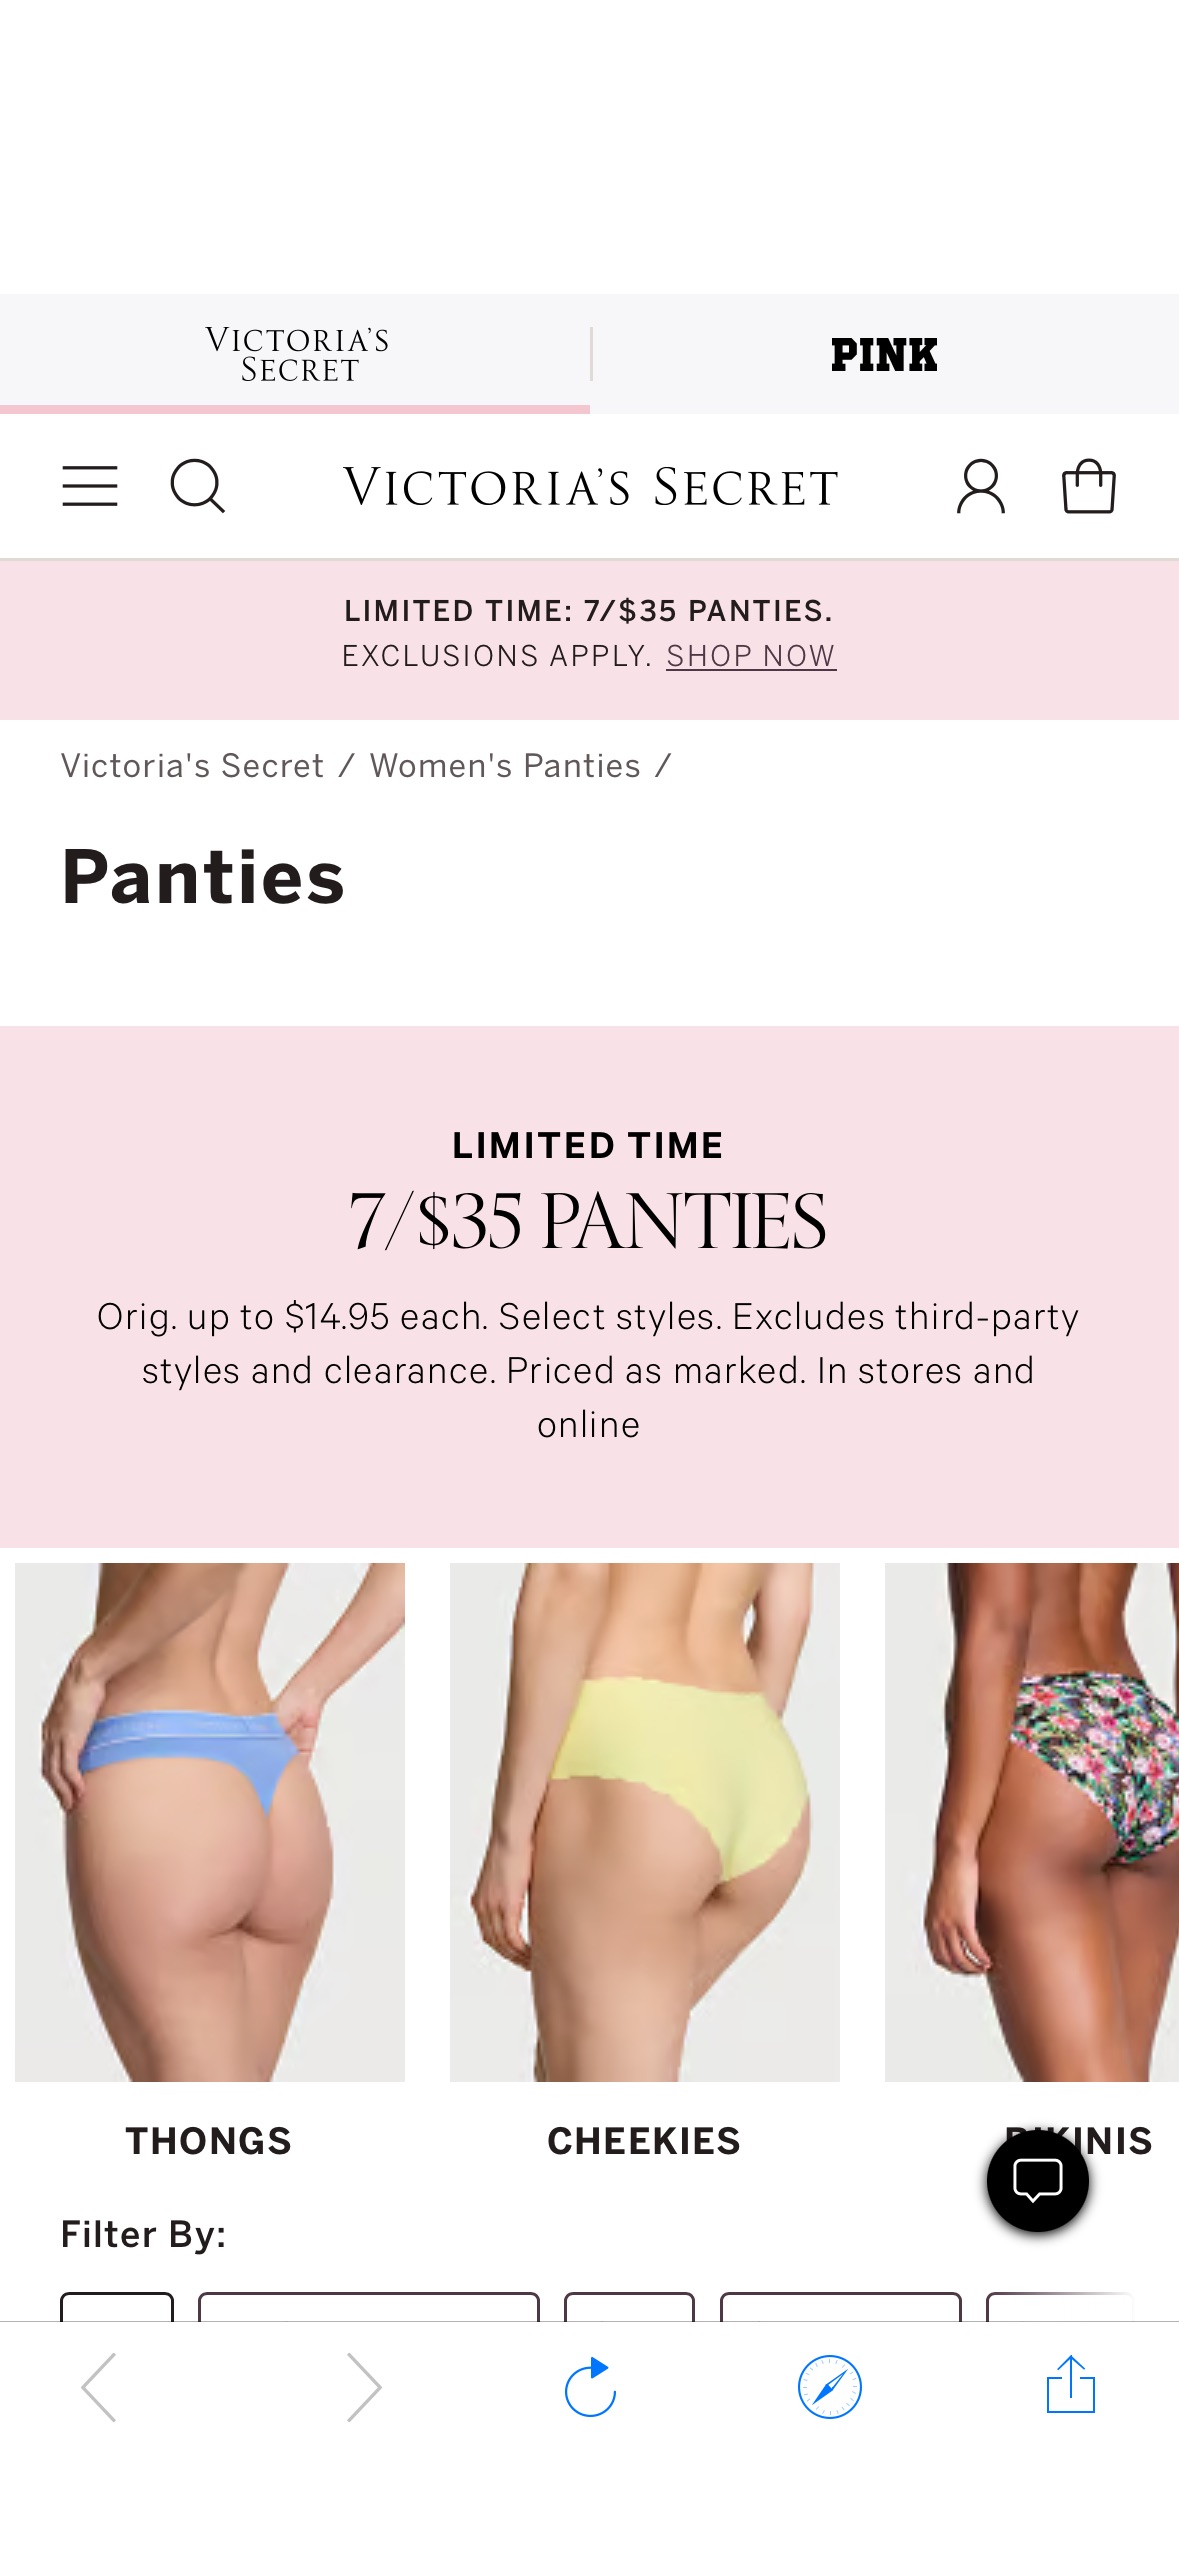 LIMITED TIME
7/$35 PANTIES